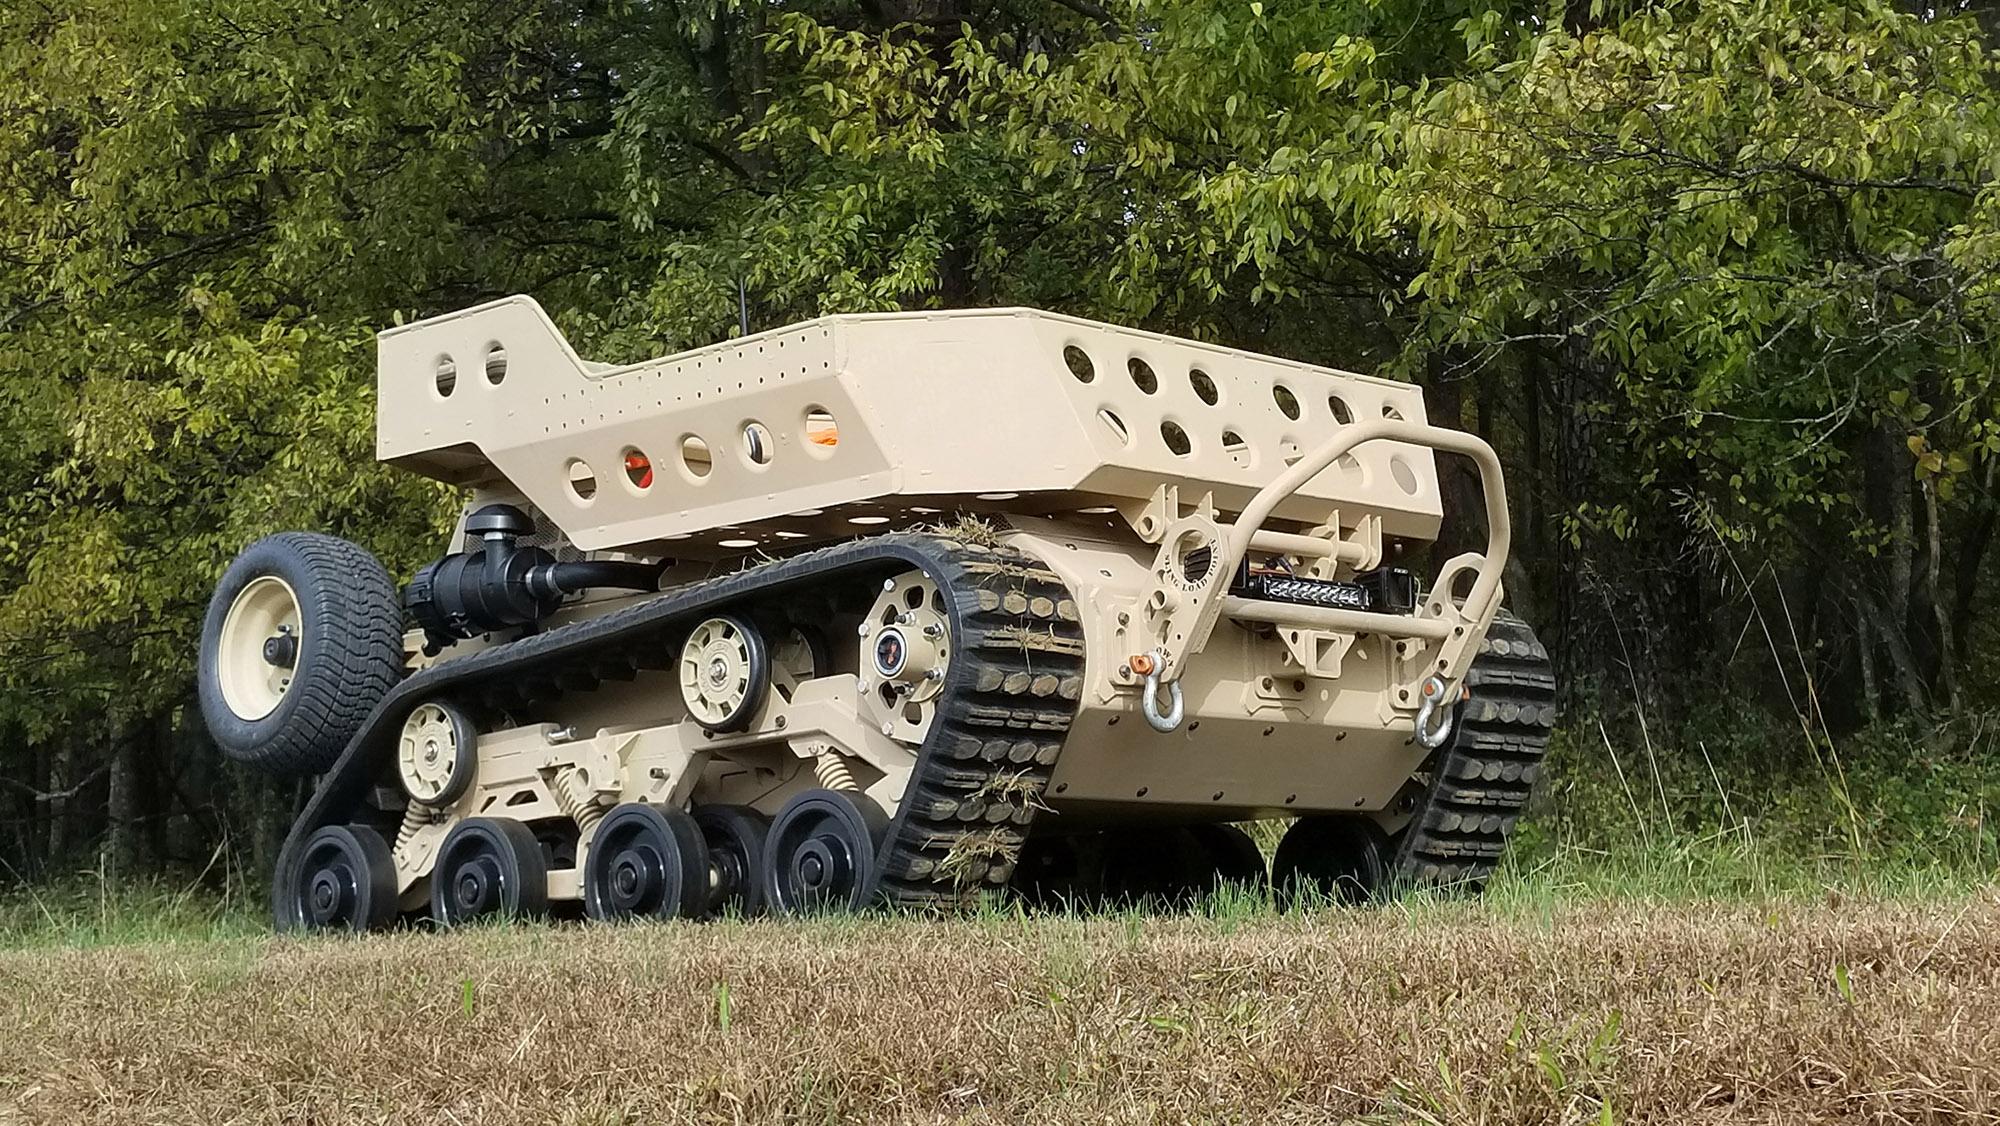 RS2-H1 Small Ground Robotic Vehicle | Textron Systems